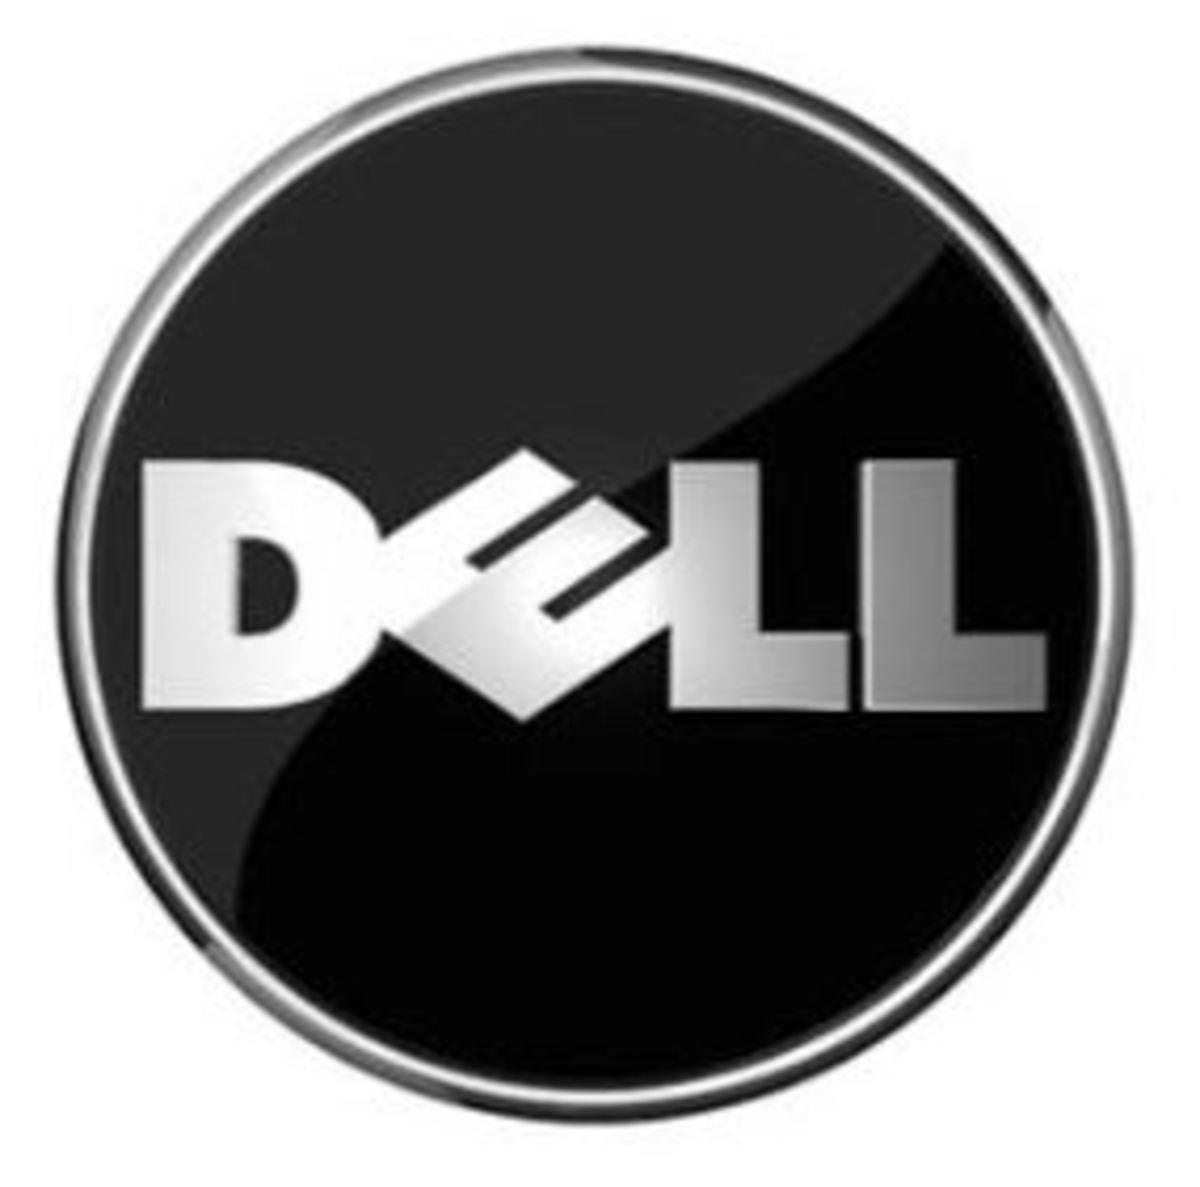 Cites Logo - Dell Cites Study Showing PC Share Growth - Twice